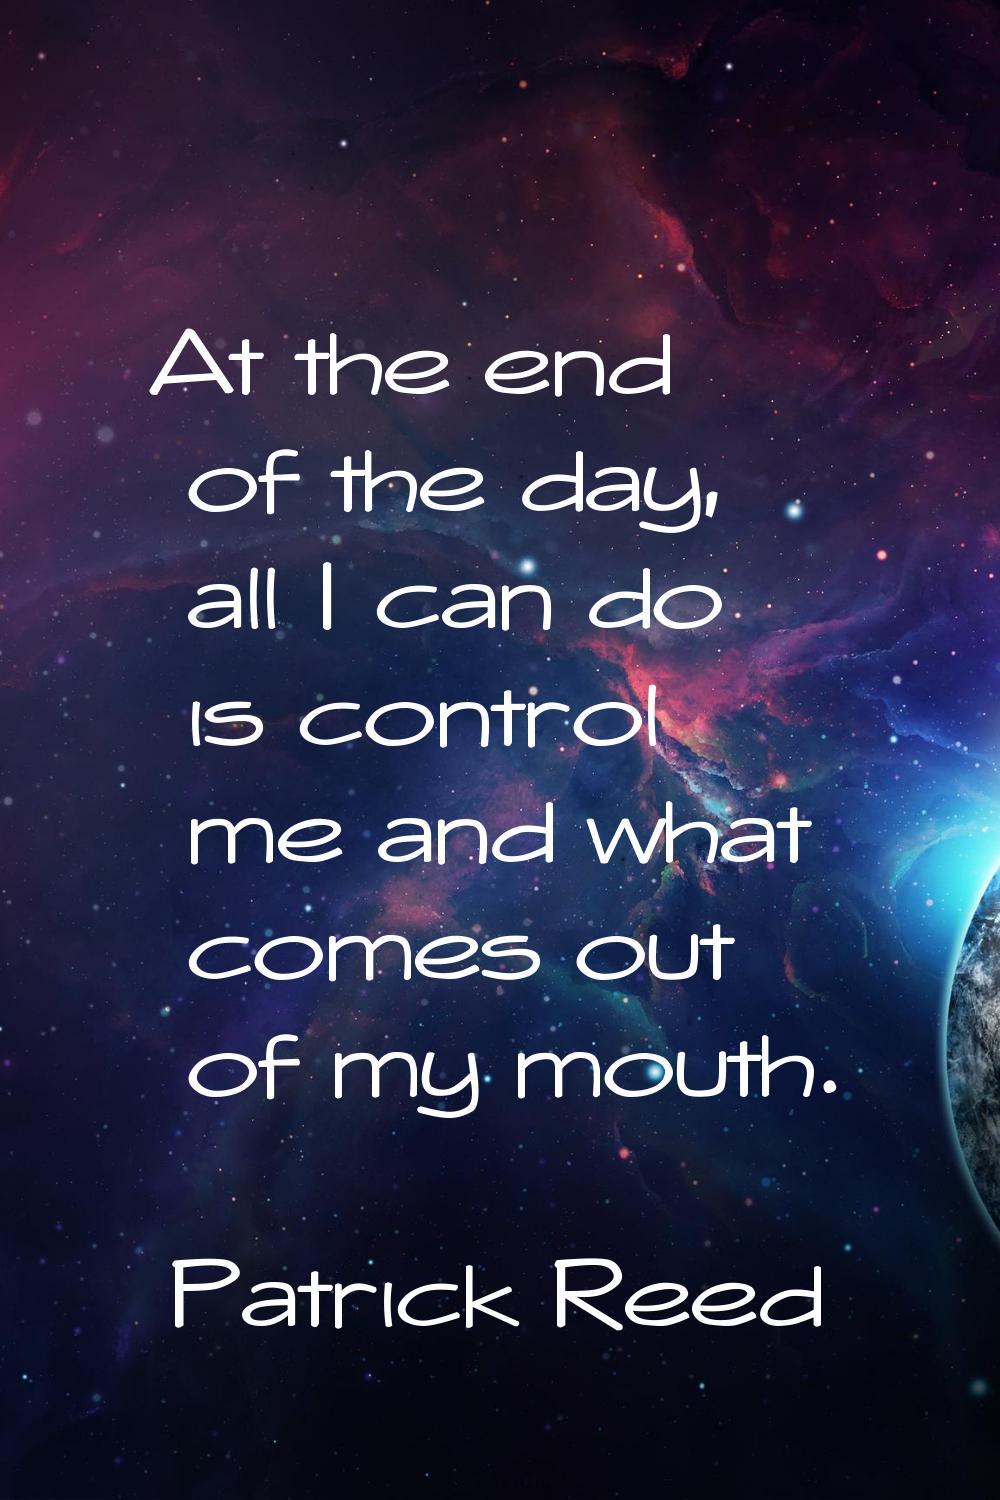 At the end of the day, all I can do is control me and what comes out of my mouth.